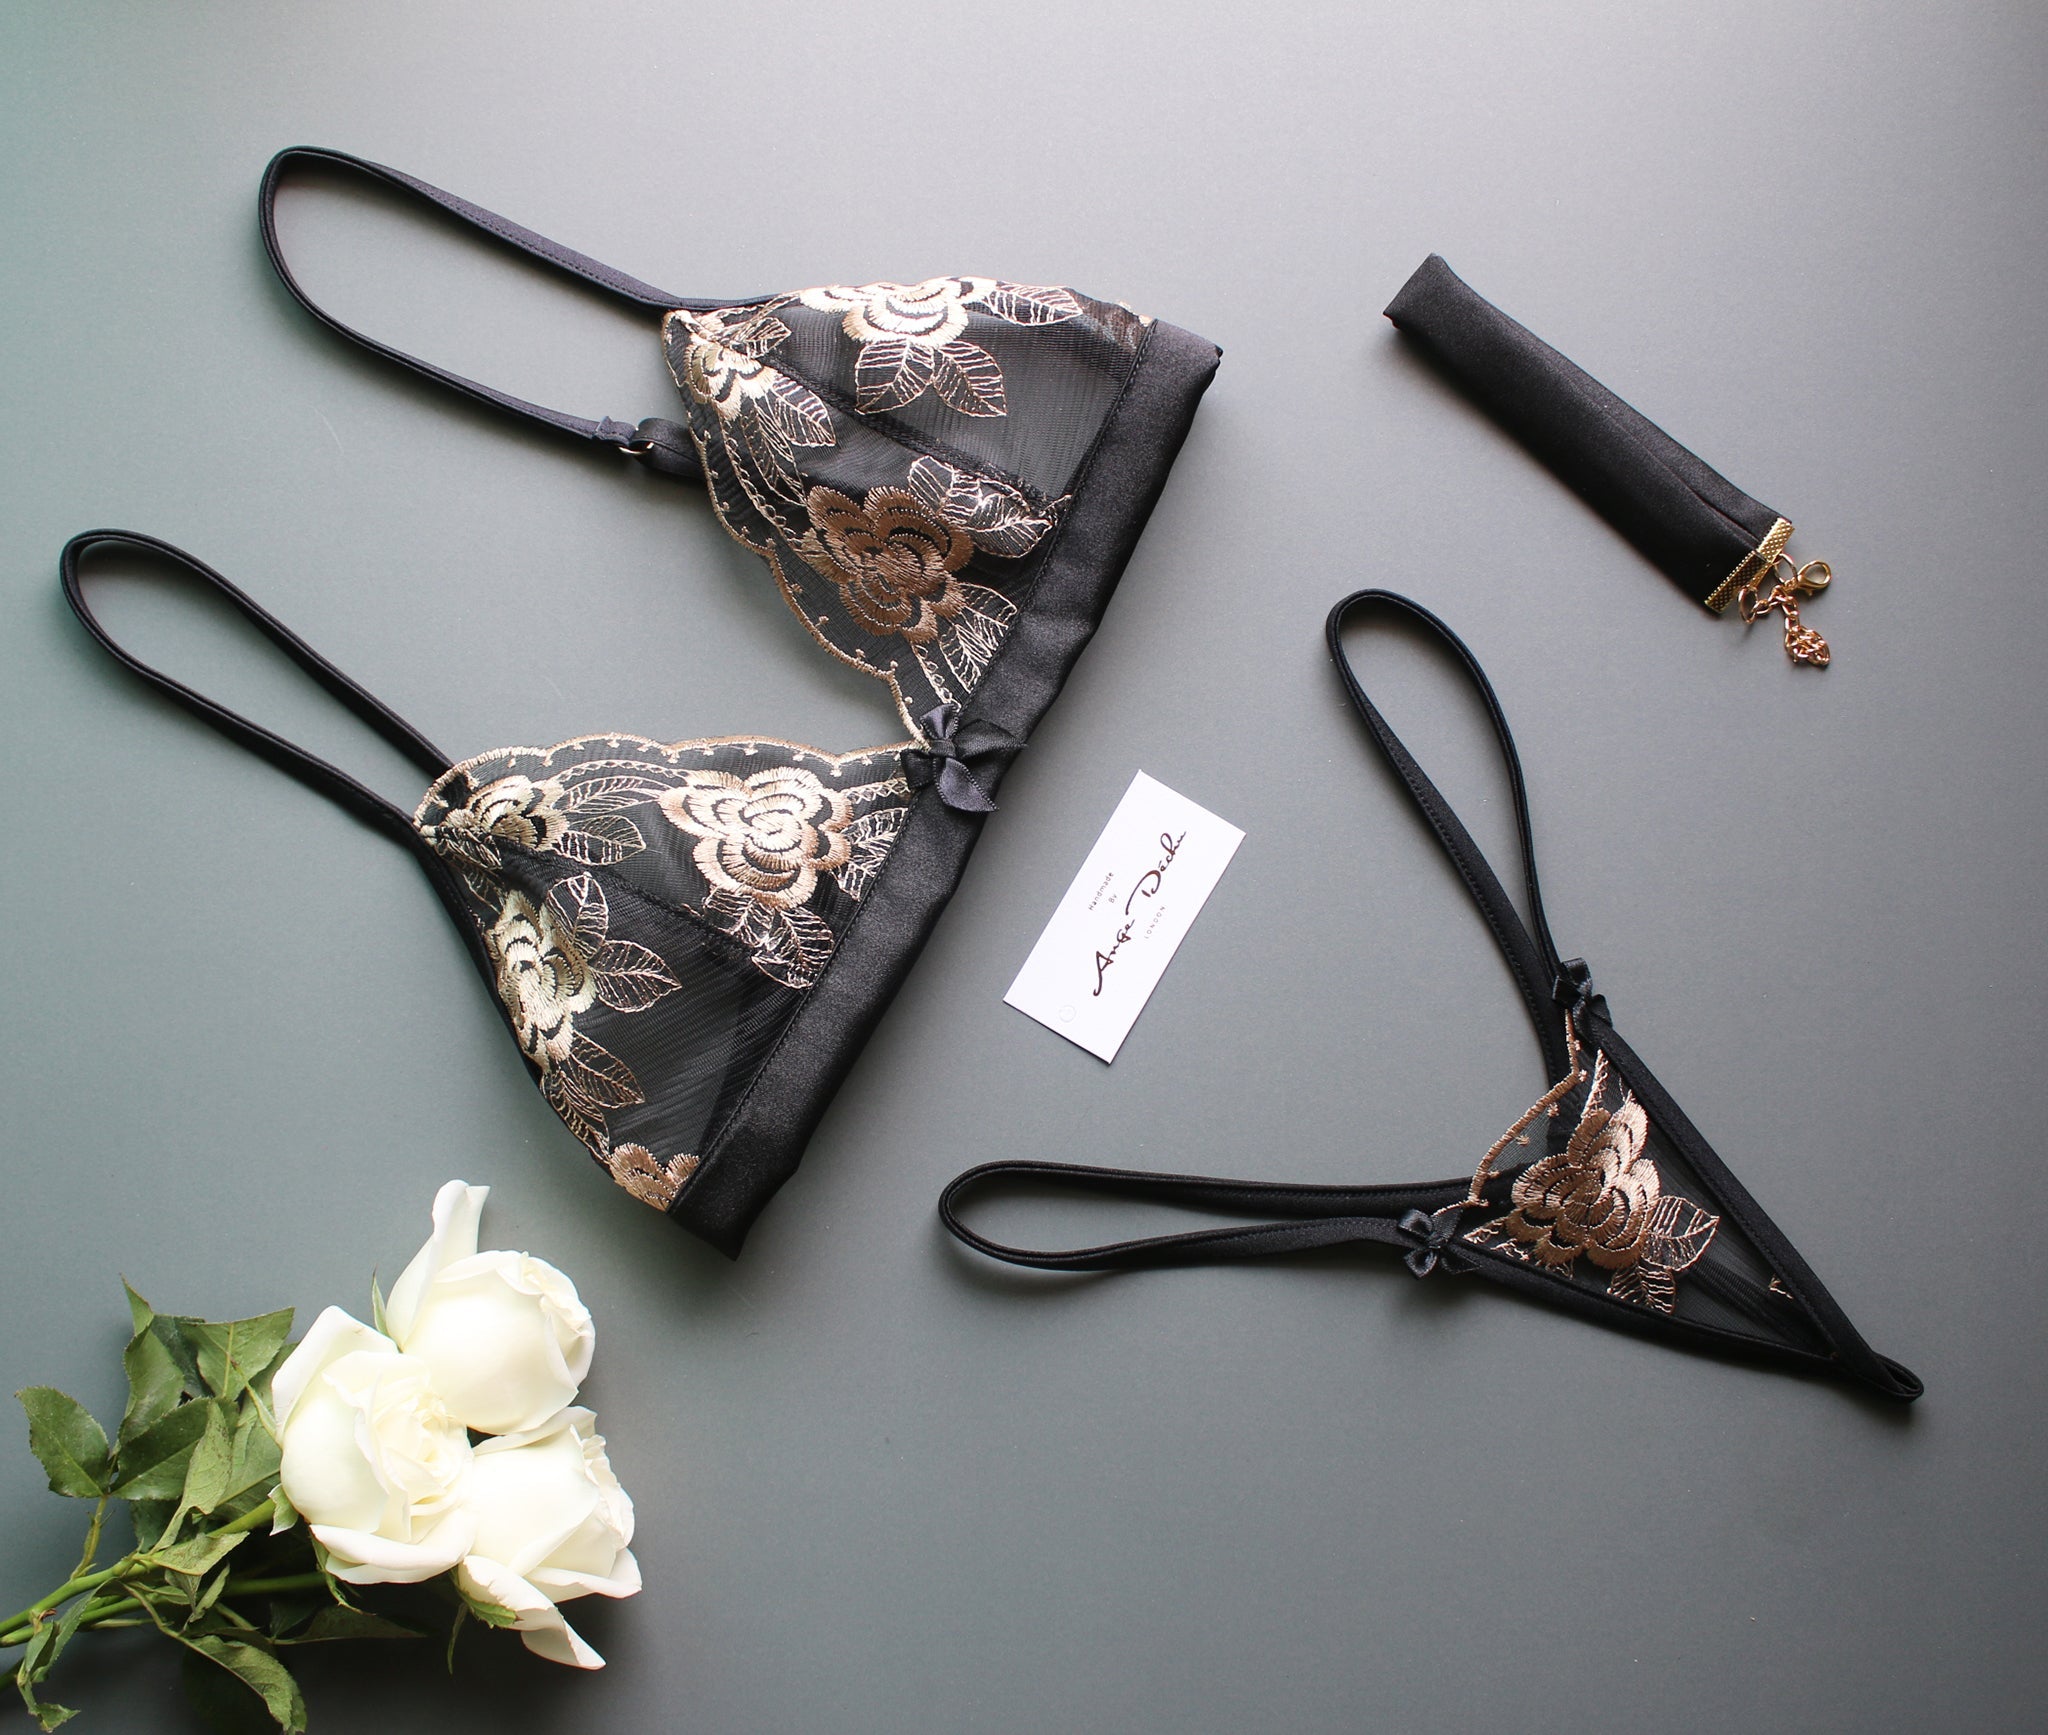 Sexy see through lingerie set with micro G string panties in black and gold lace with black trim sexy sheer boudoir lingerie - Ange Déchu